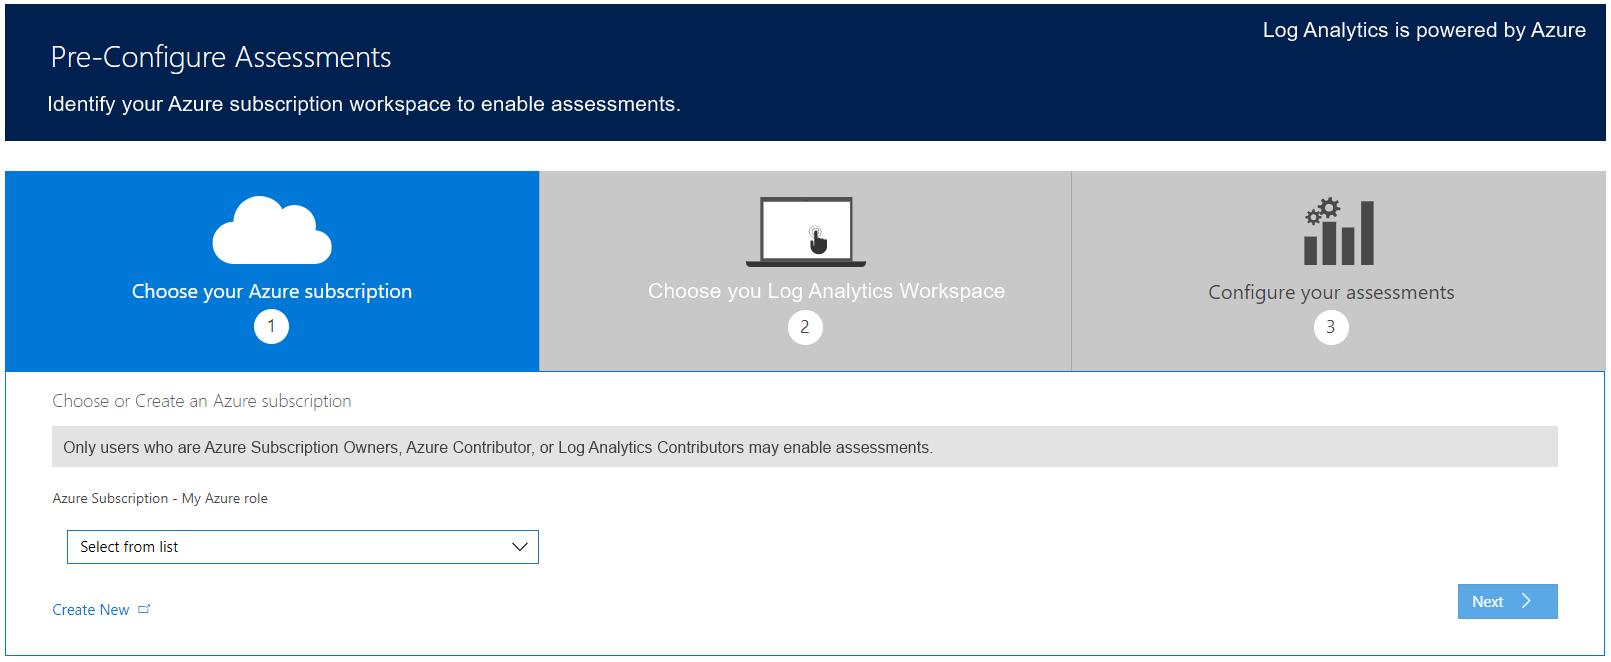 The Preconfigure Assessments page with the Choose Your Azure Subscription step highlighted.